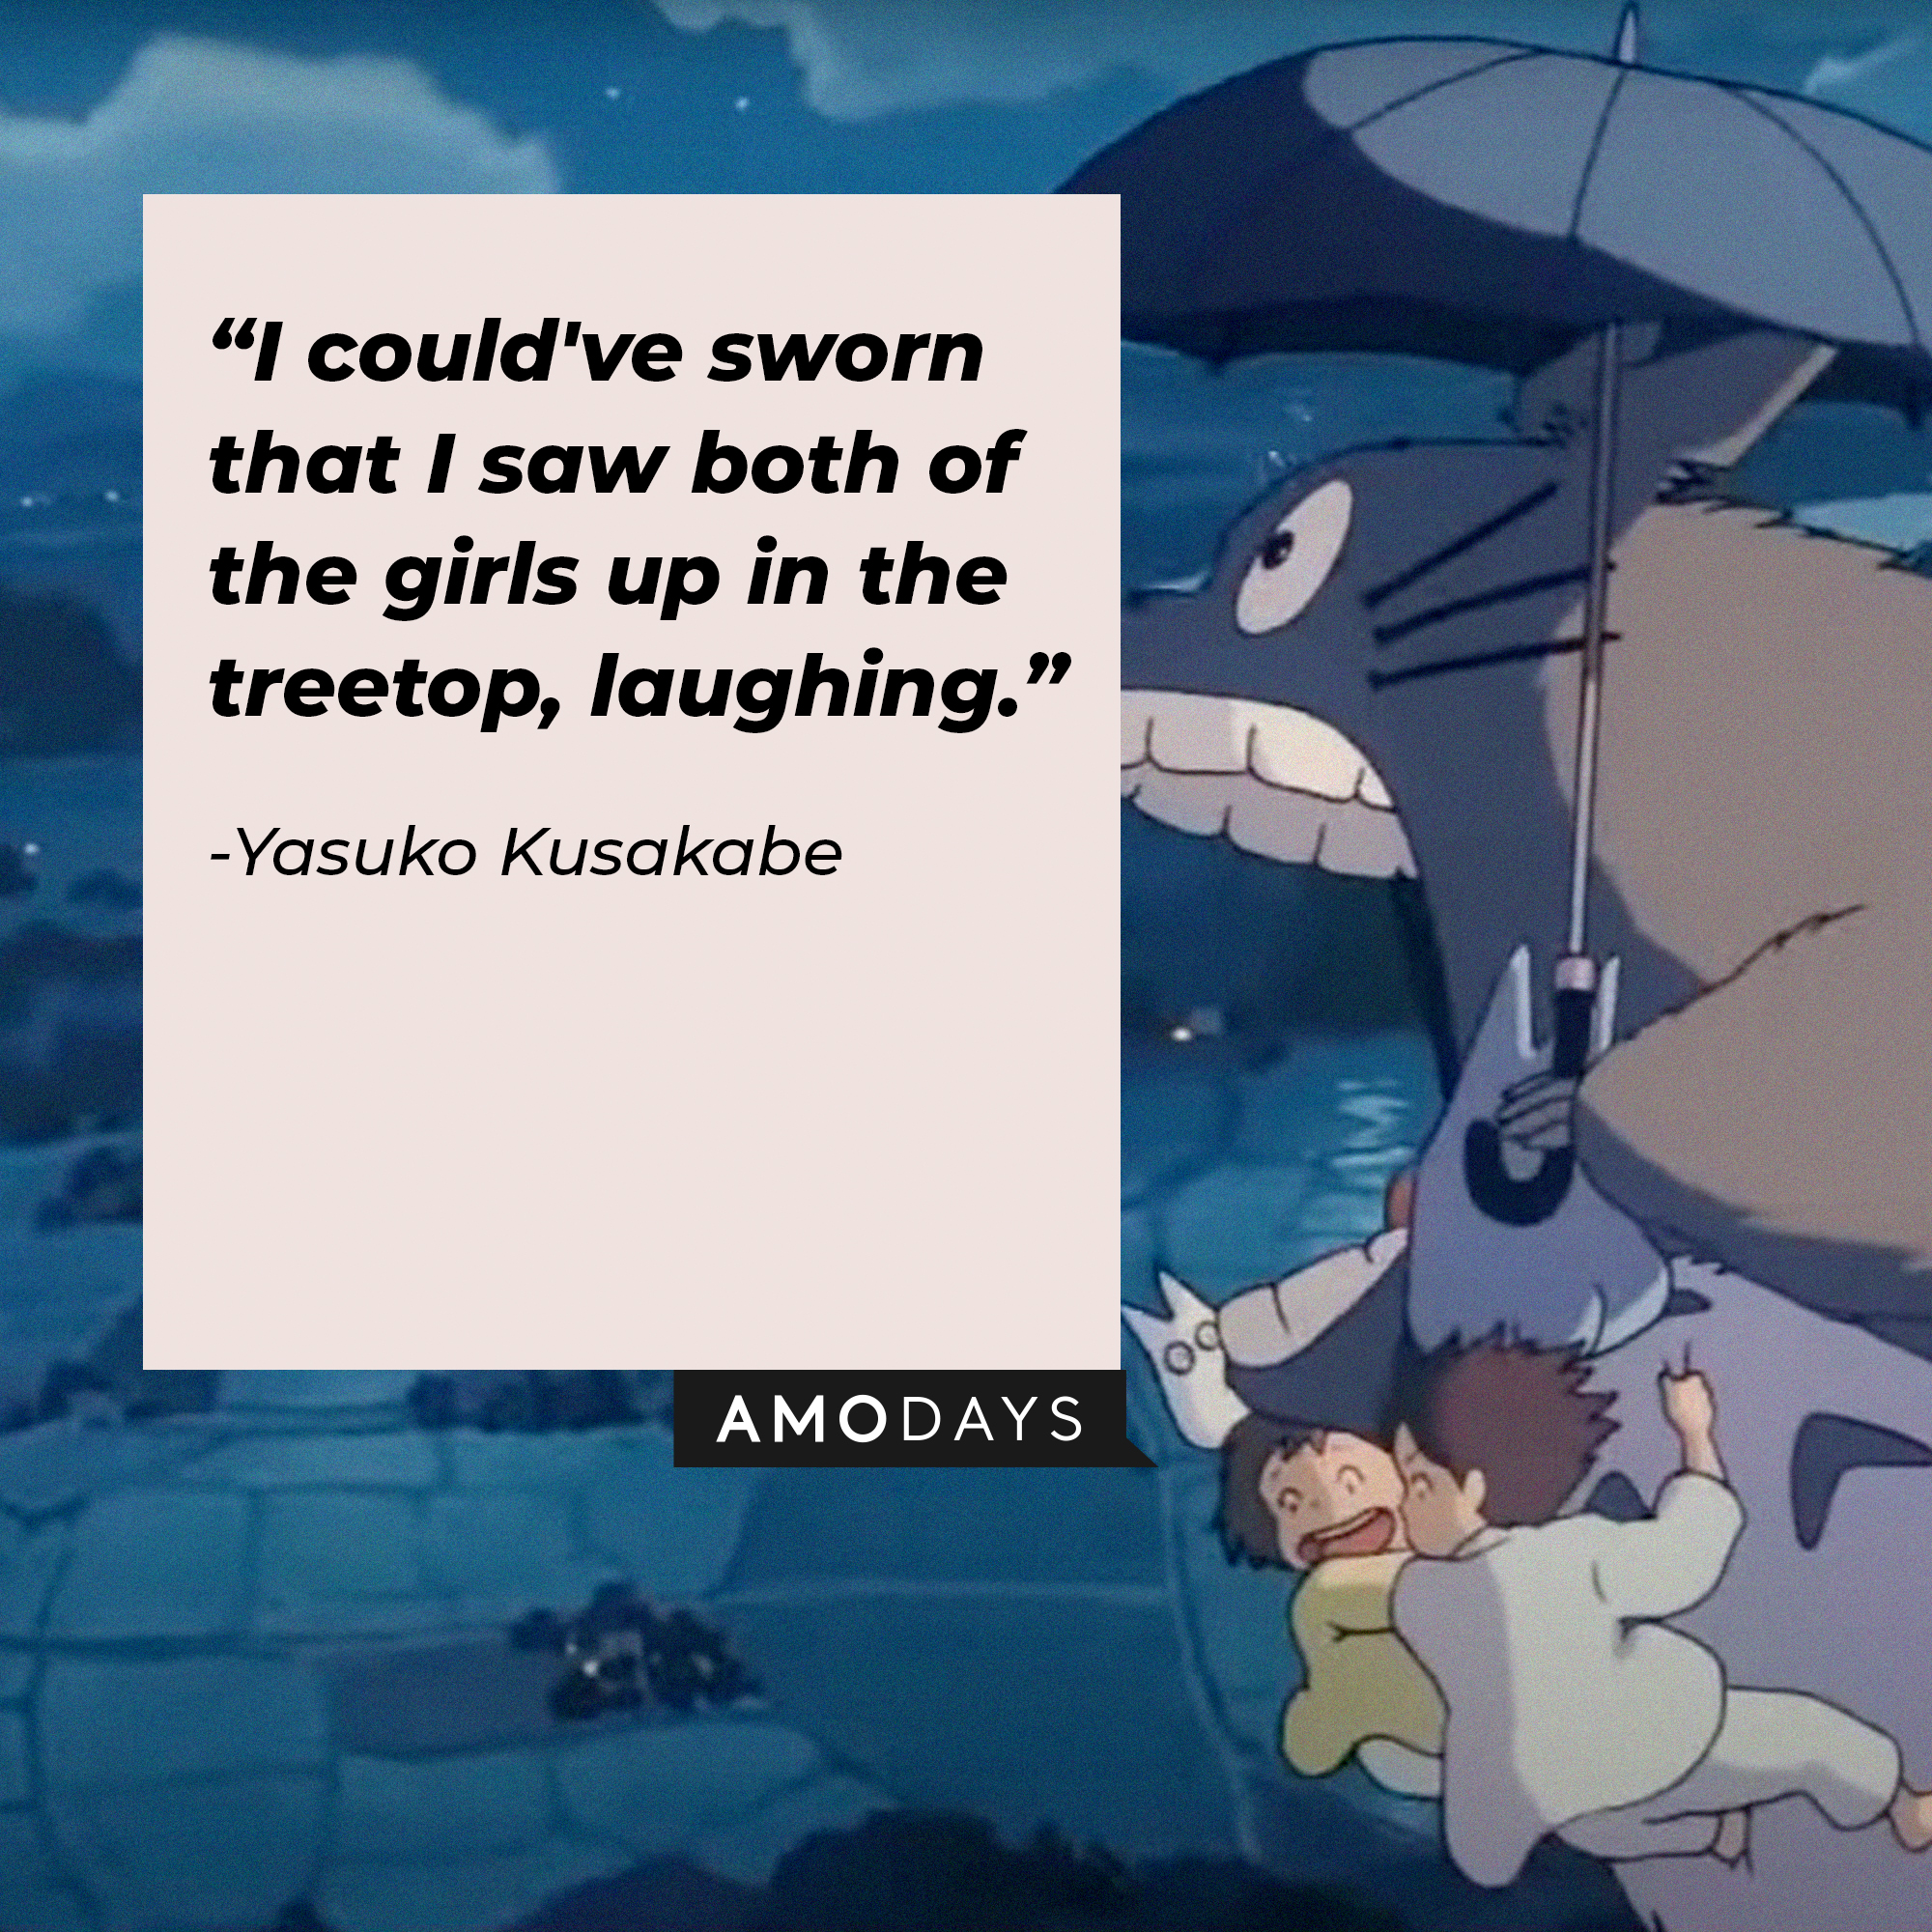 An image of Totoro, Mei, and Satsuki Kusakabe with Yasuko Kusakabe’s quote: “I could've sworn that I saw both of the girls up in the treetop, laughing.” | Source: facebook.com/GhibliUSA